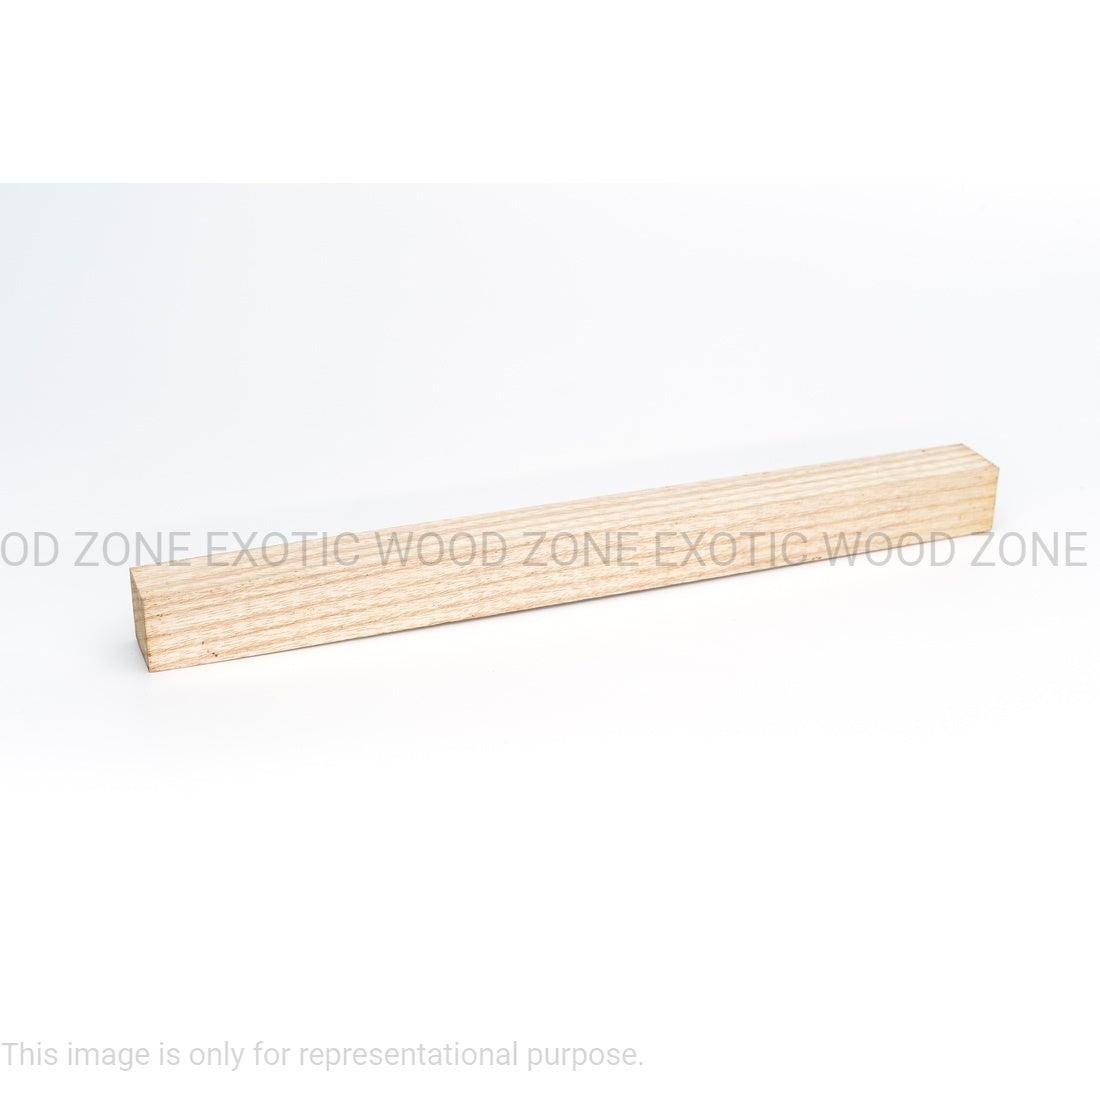 Swamp Ash Hobbywood Blank 1&quot; x 1 &quot; x 12&quot; inches Exotic Wood Zone